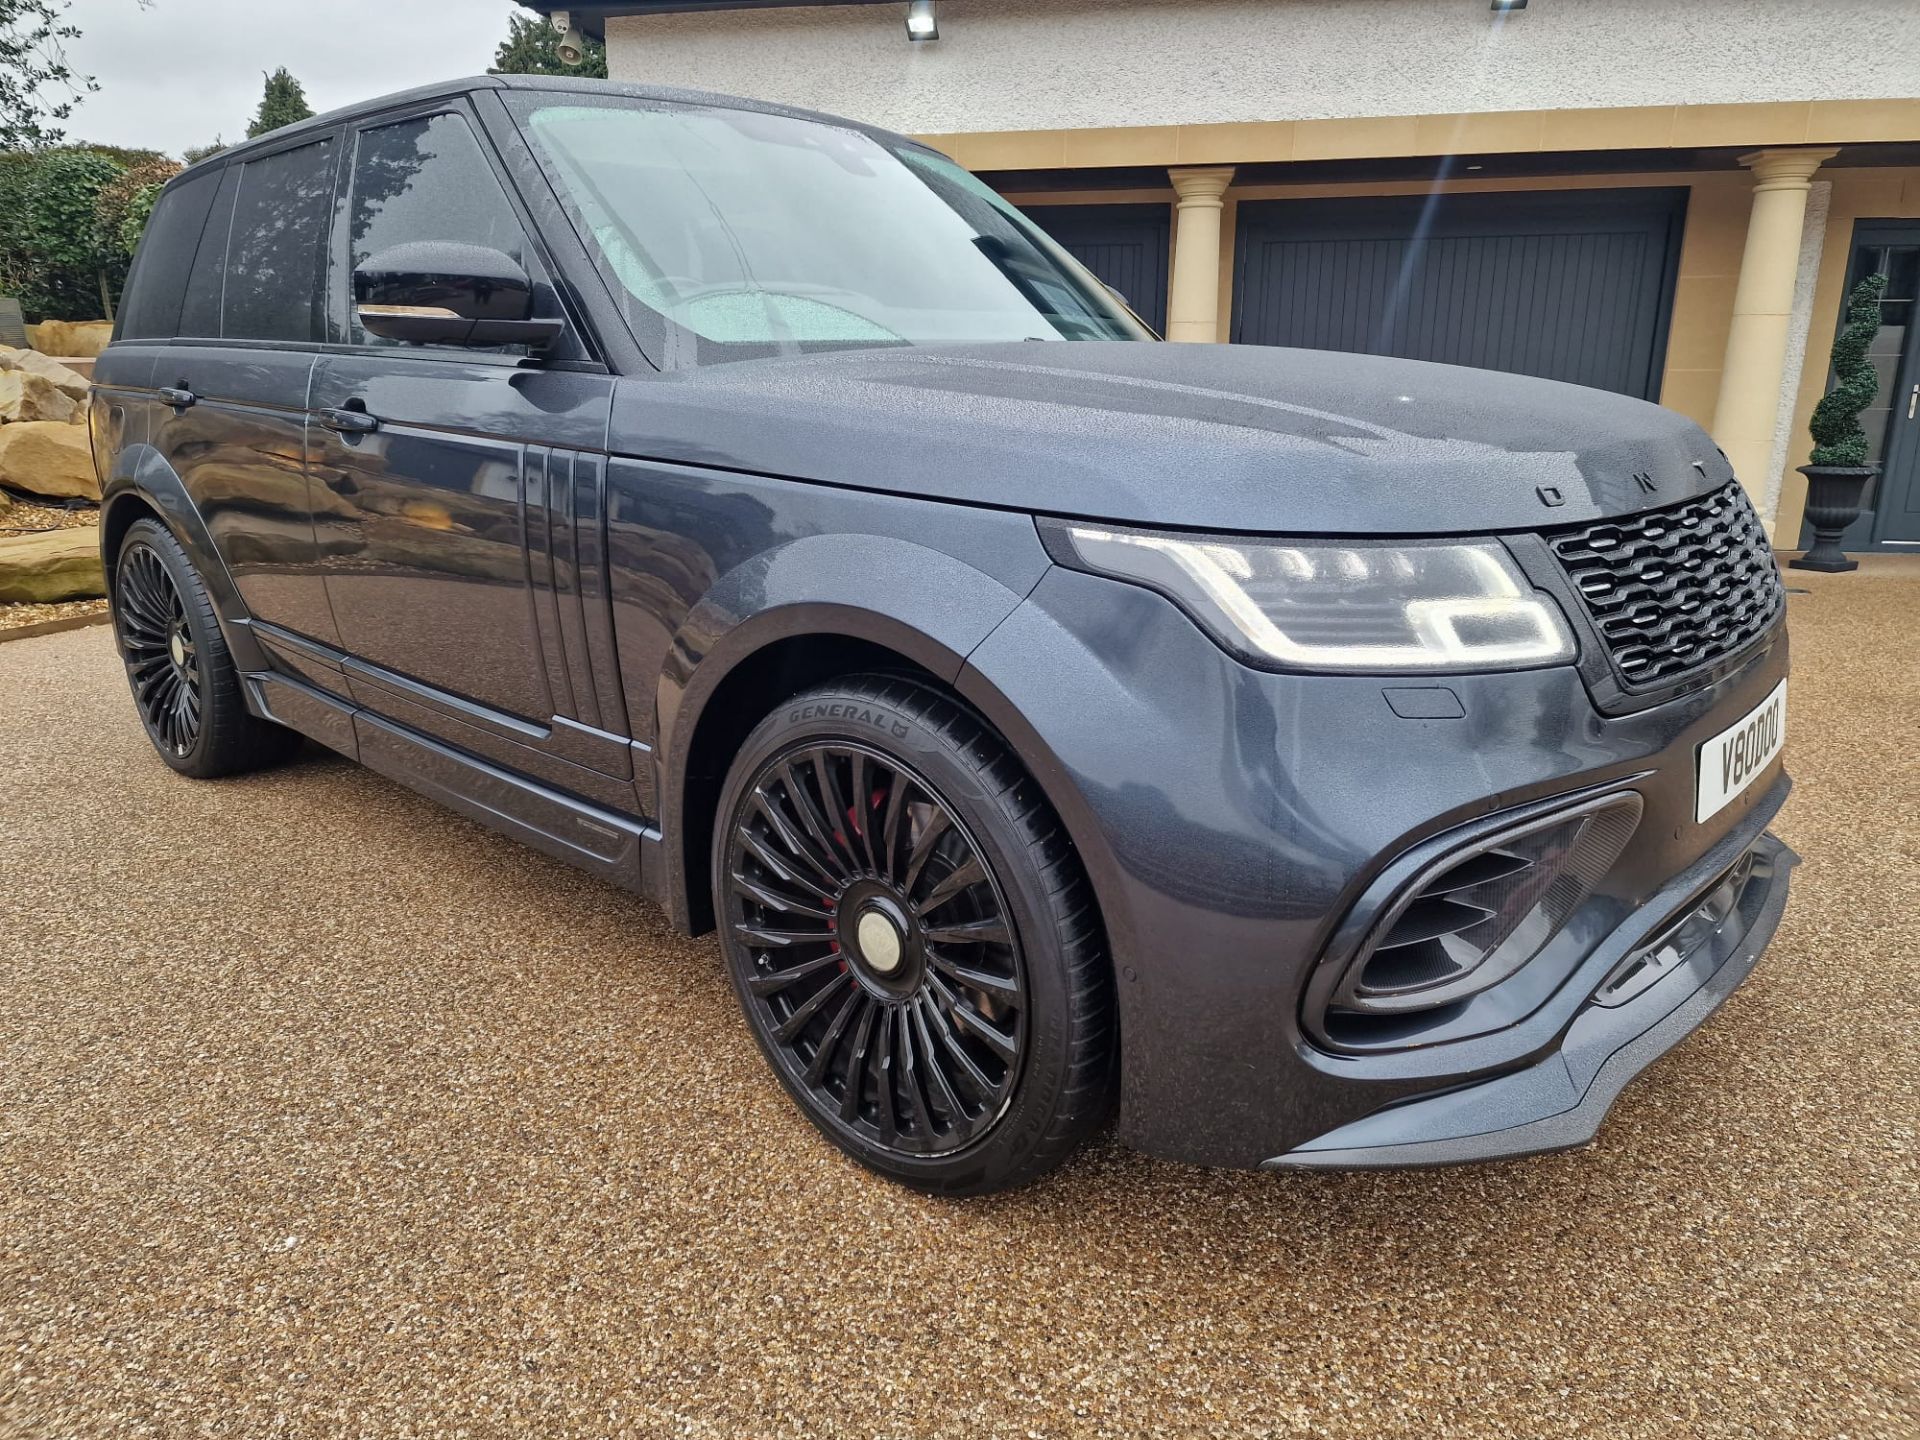 2018/68 RANGE ROVER SV AUTOBIOGRAPHY DYN V8 SC AUTO - £40K WORTH OF ONYX BODY KIT AND CONVERSION - Image 3 of 77